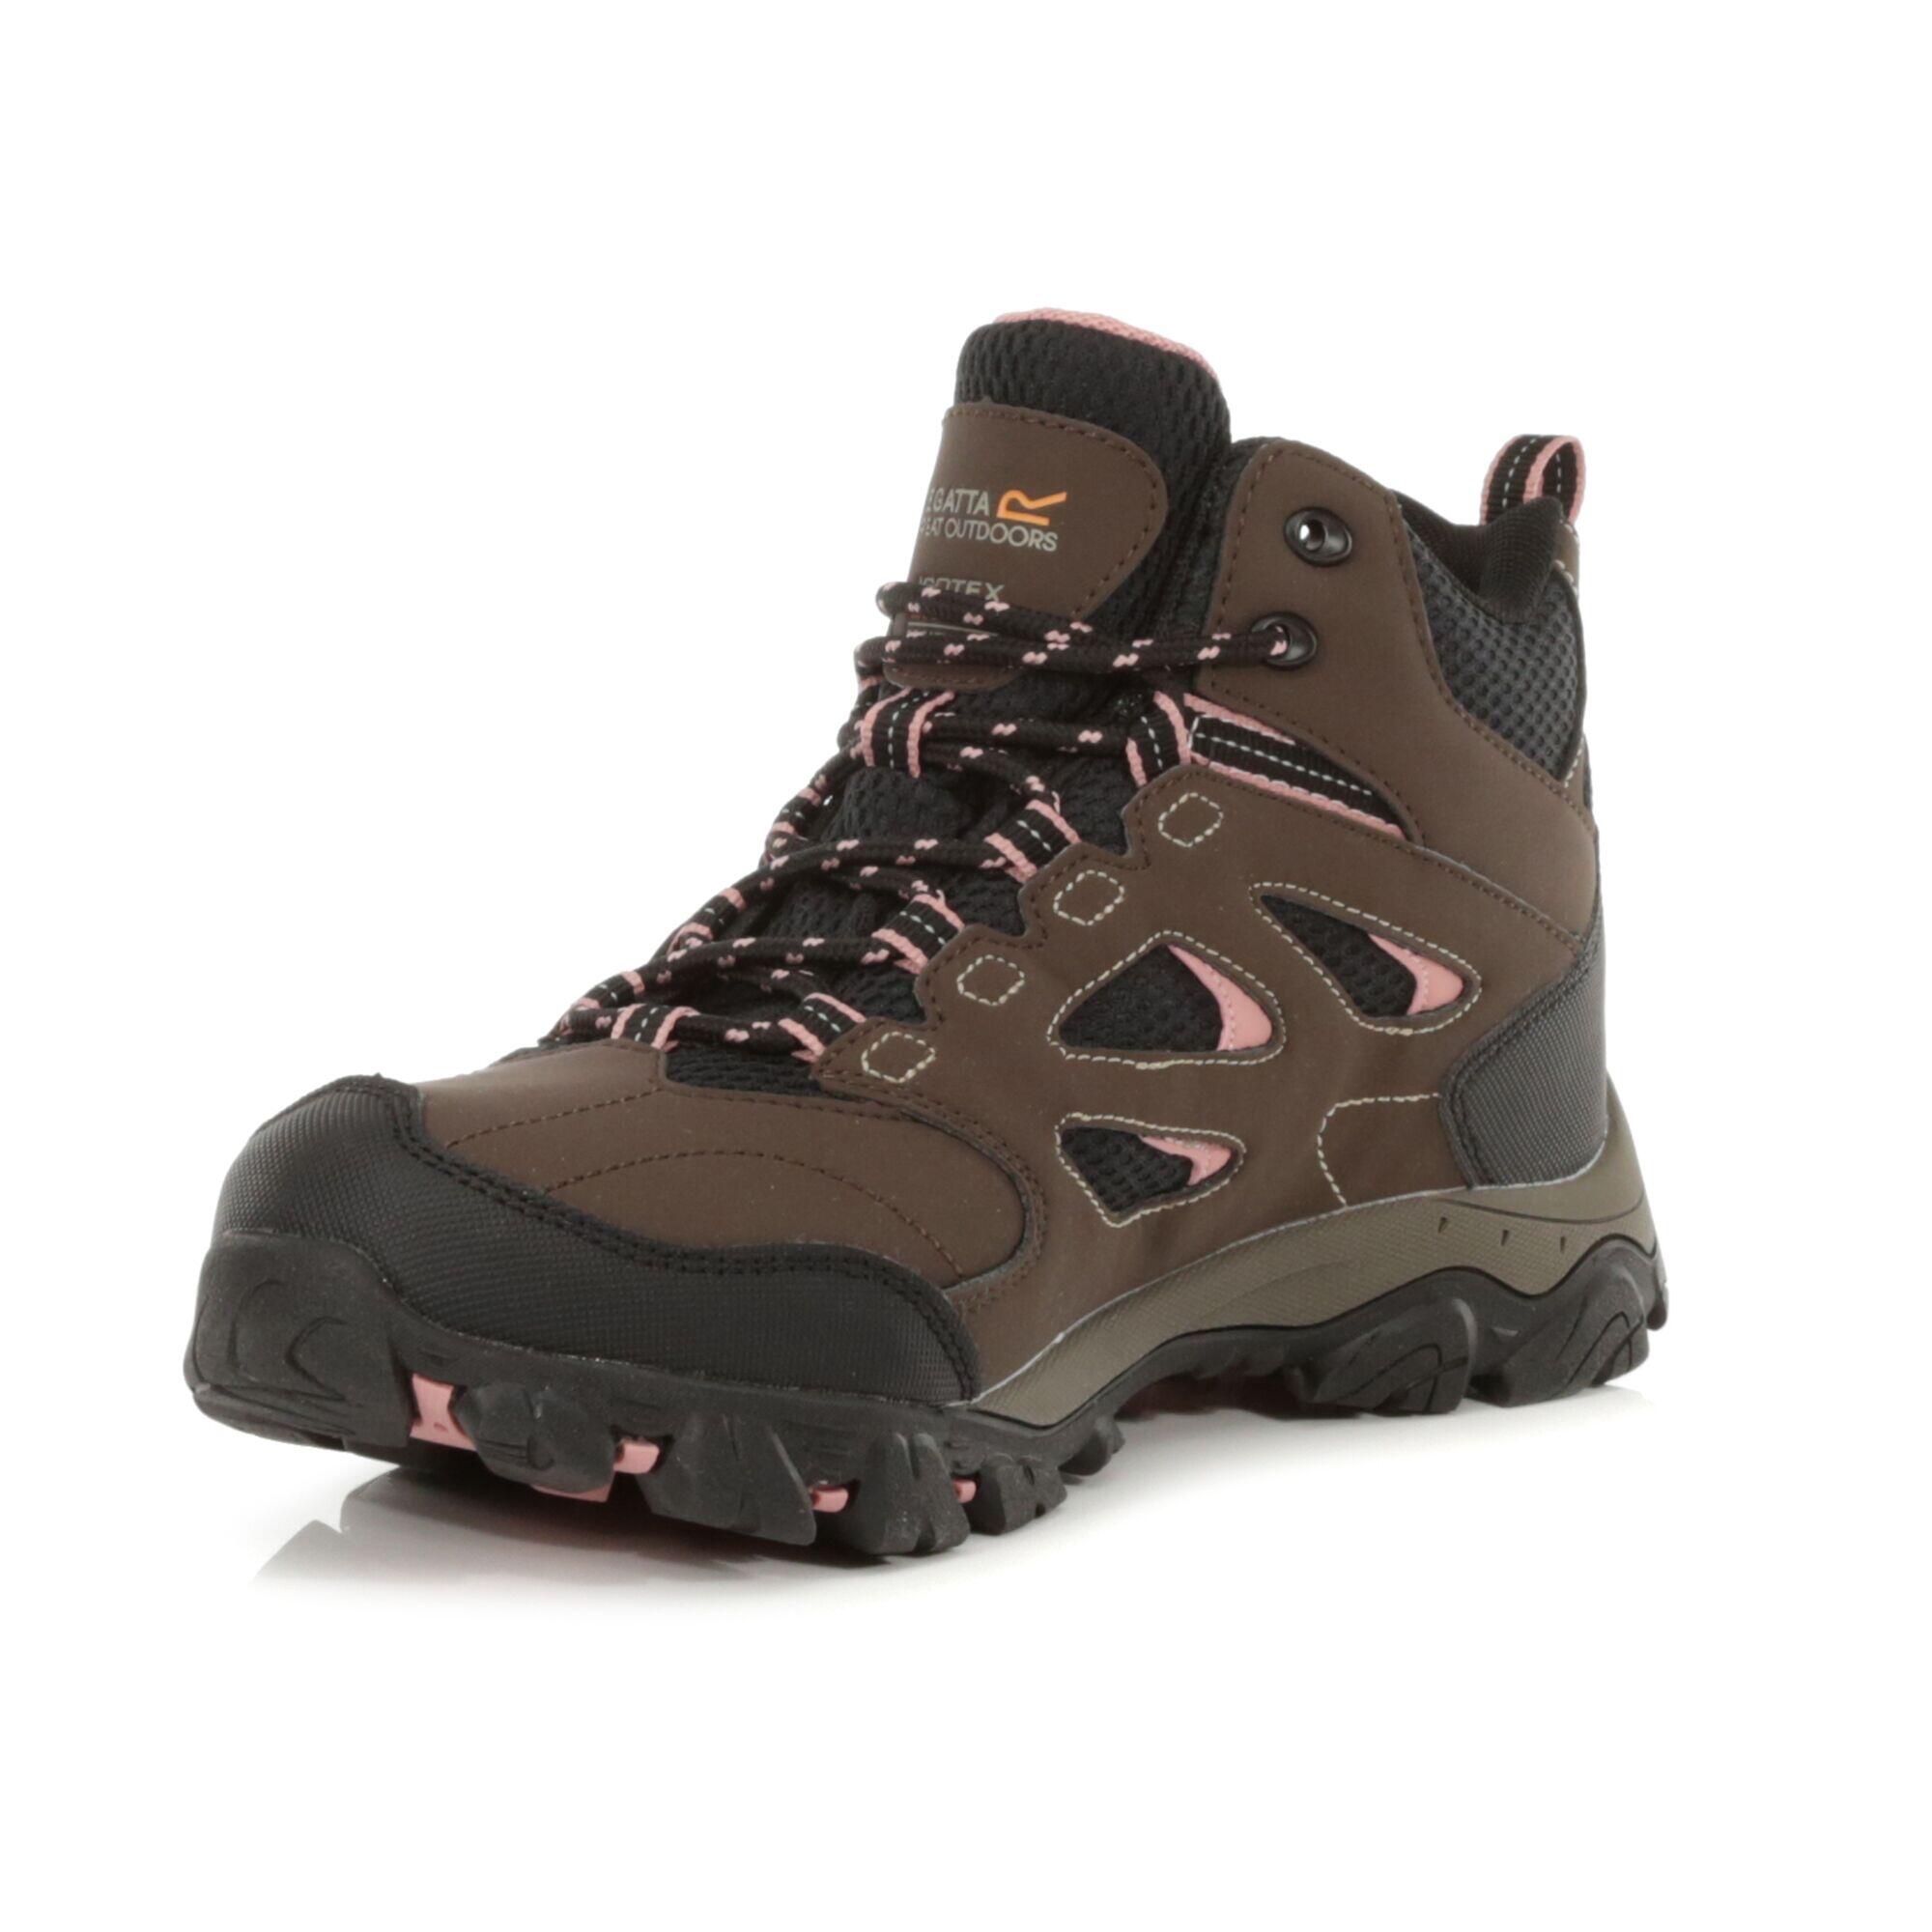 Lady Holcombe IEP Mid Women's Hiking Boots - Chestnut Brown 3/5